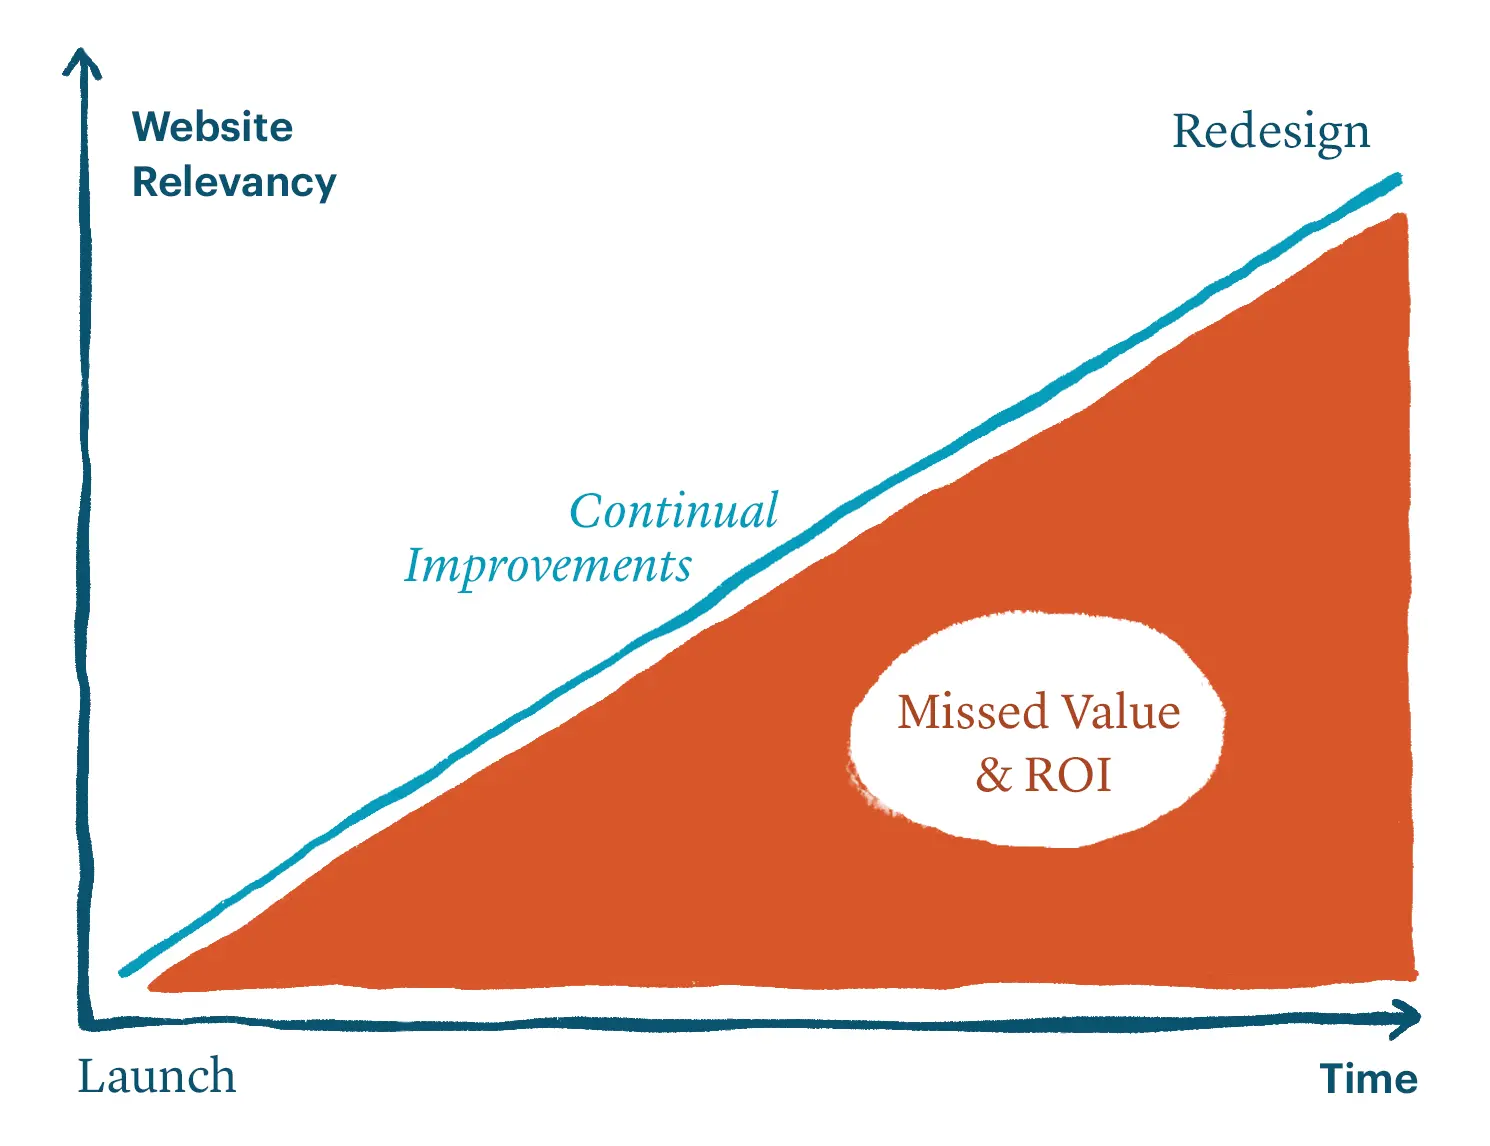 Missed value and ROI during a single website redesign cycle v.s. continuous website improvements